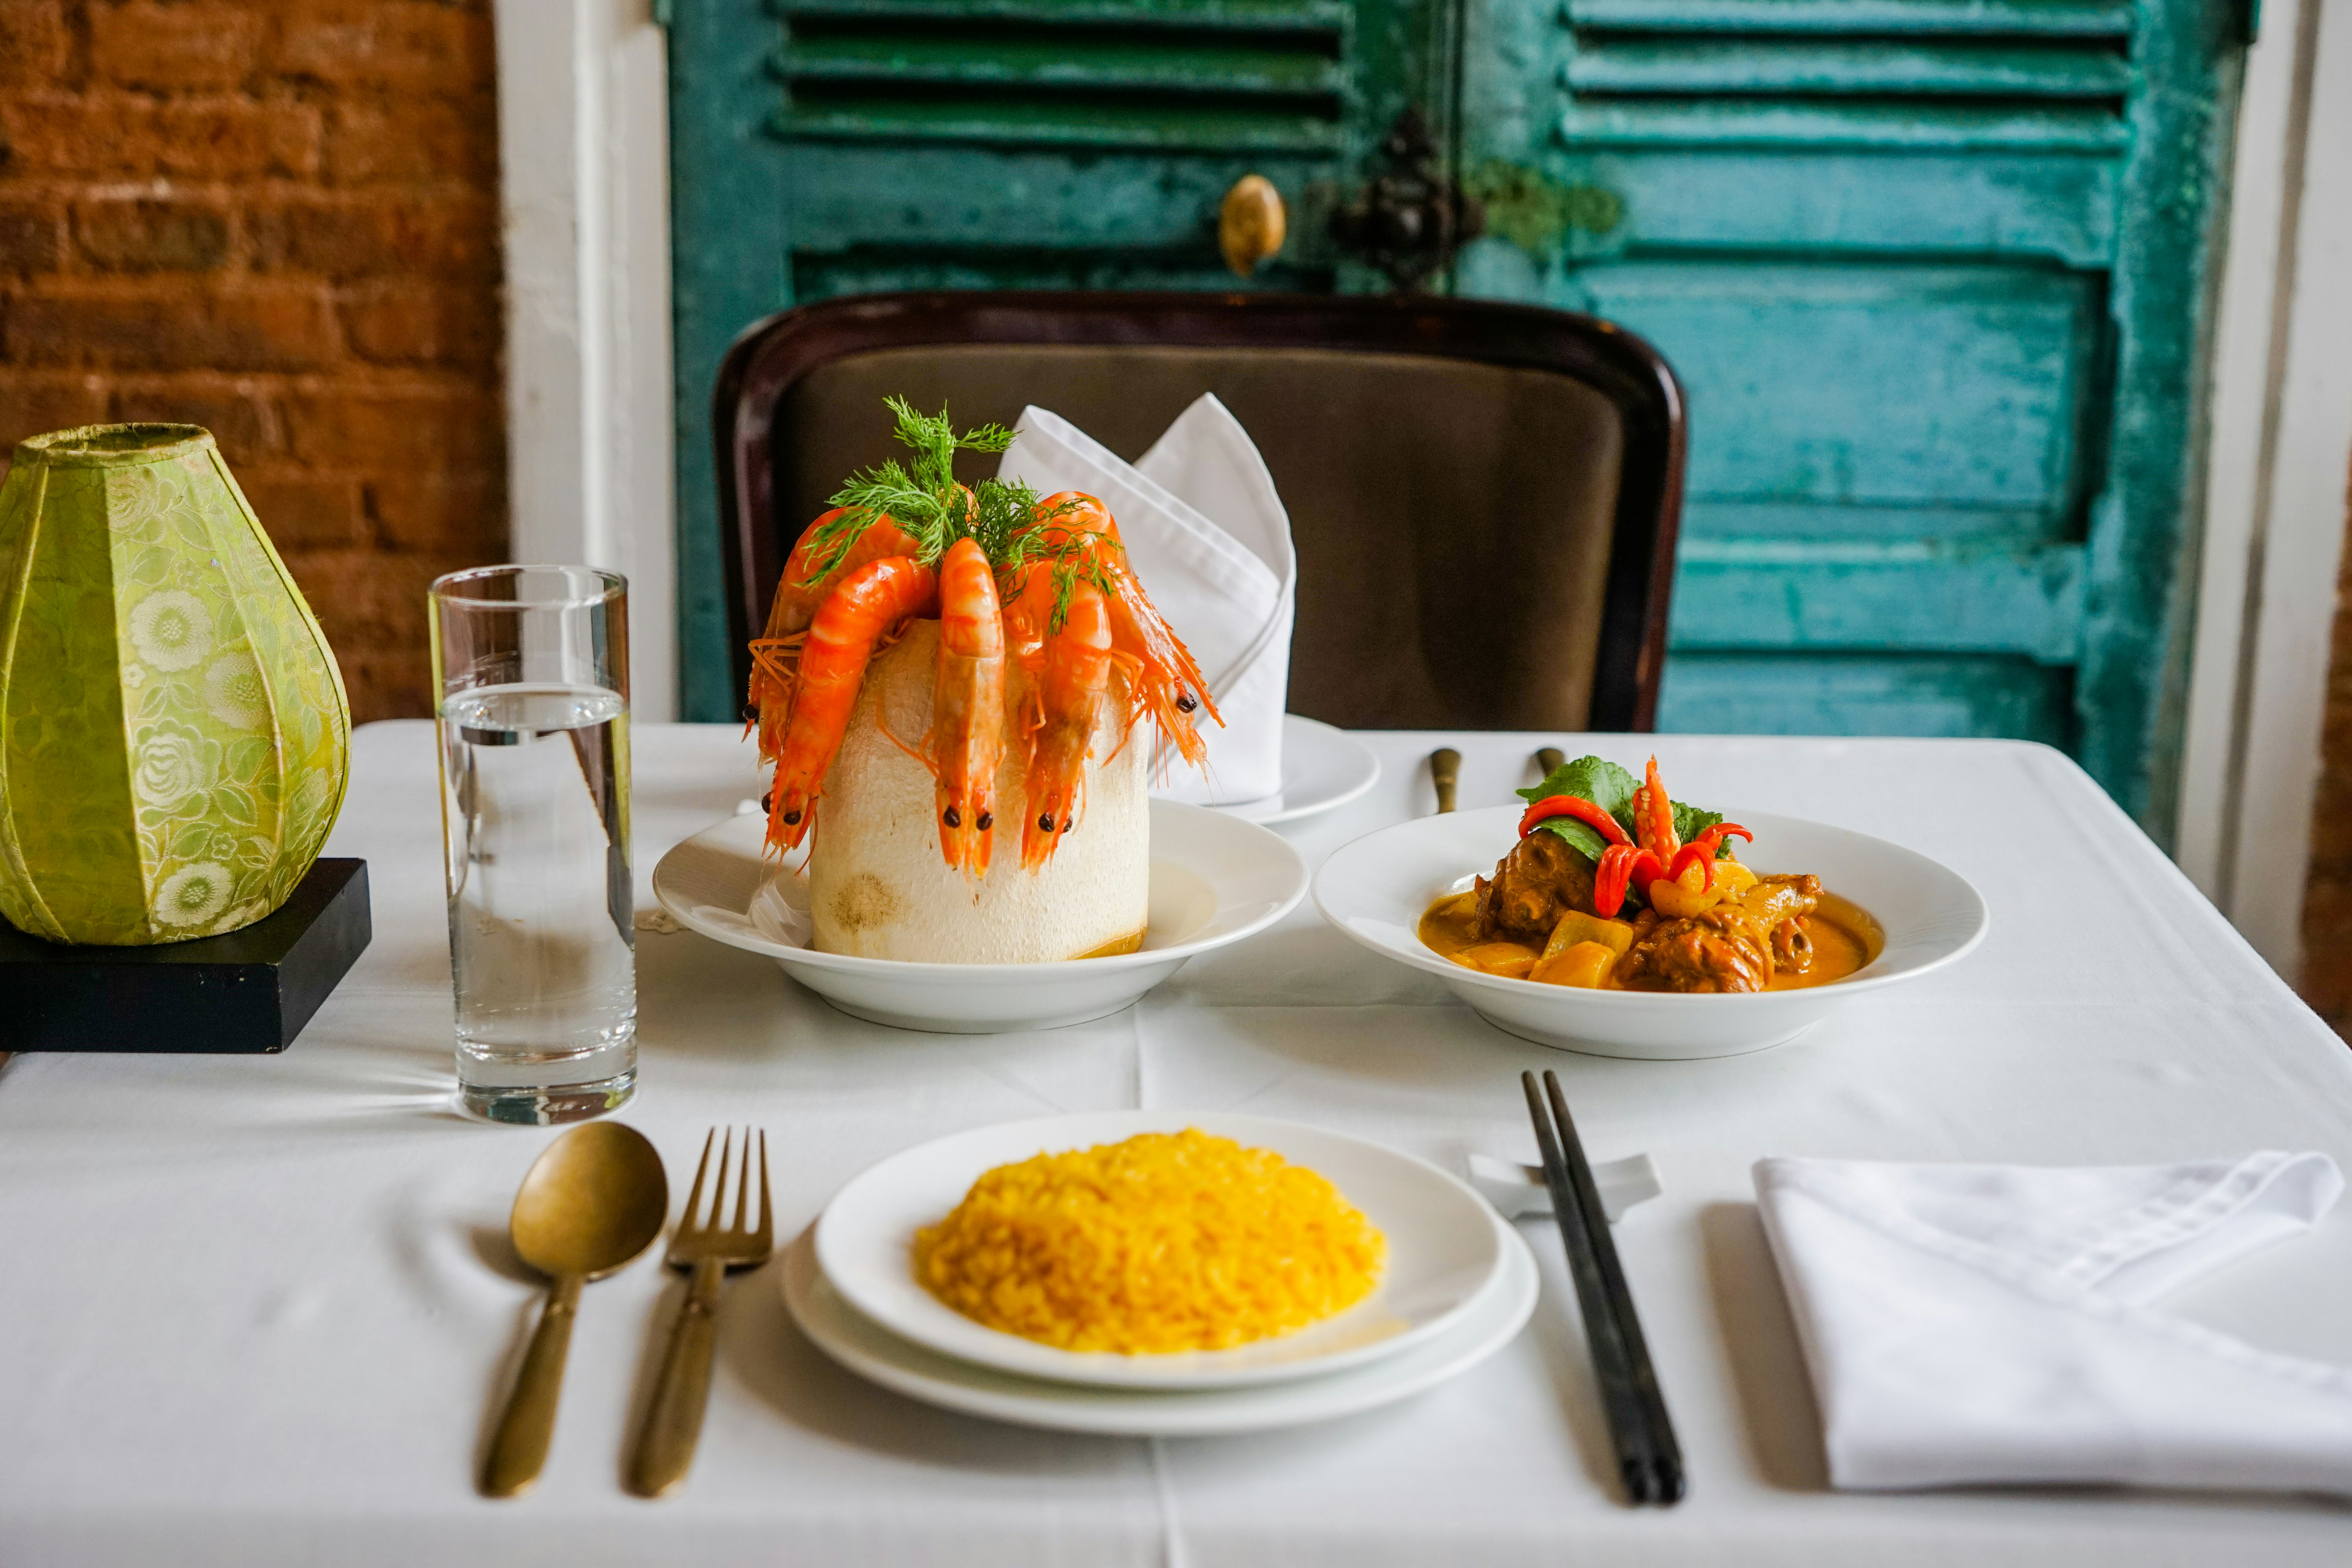 A table is set with dishes, cutlery and a glass of water. One dish is filled with yellow rice, another filled with vegetables and meat in an orange sauce and third has cooked shrimp dangling from a circular dish. 